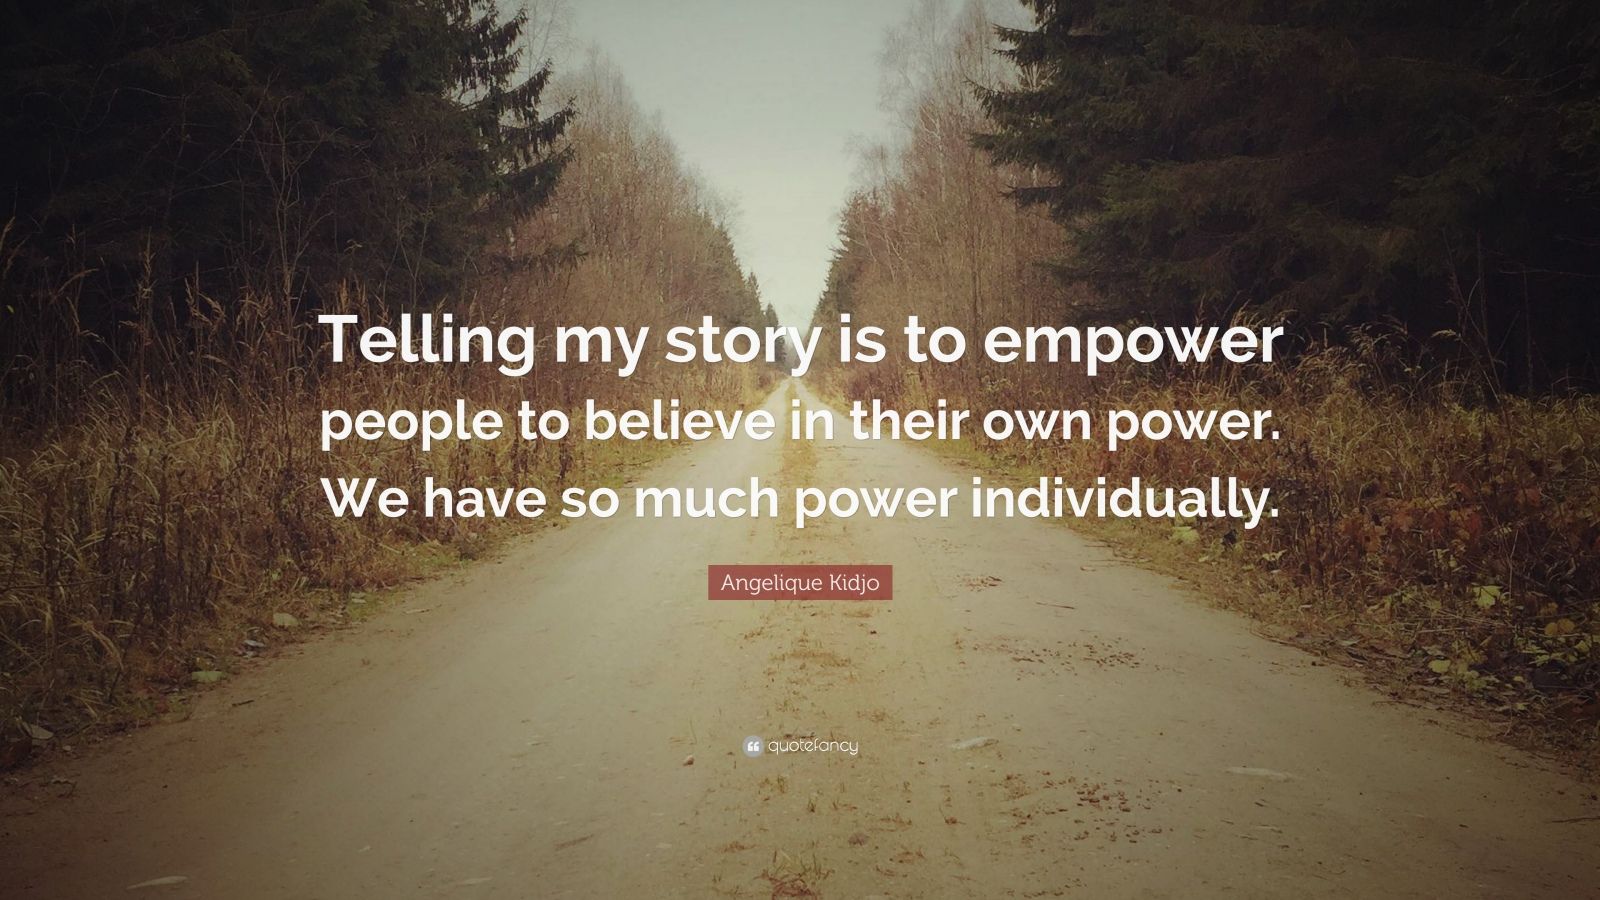 i resist by telling my story